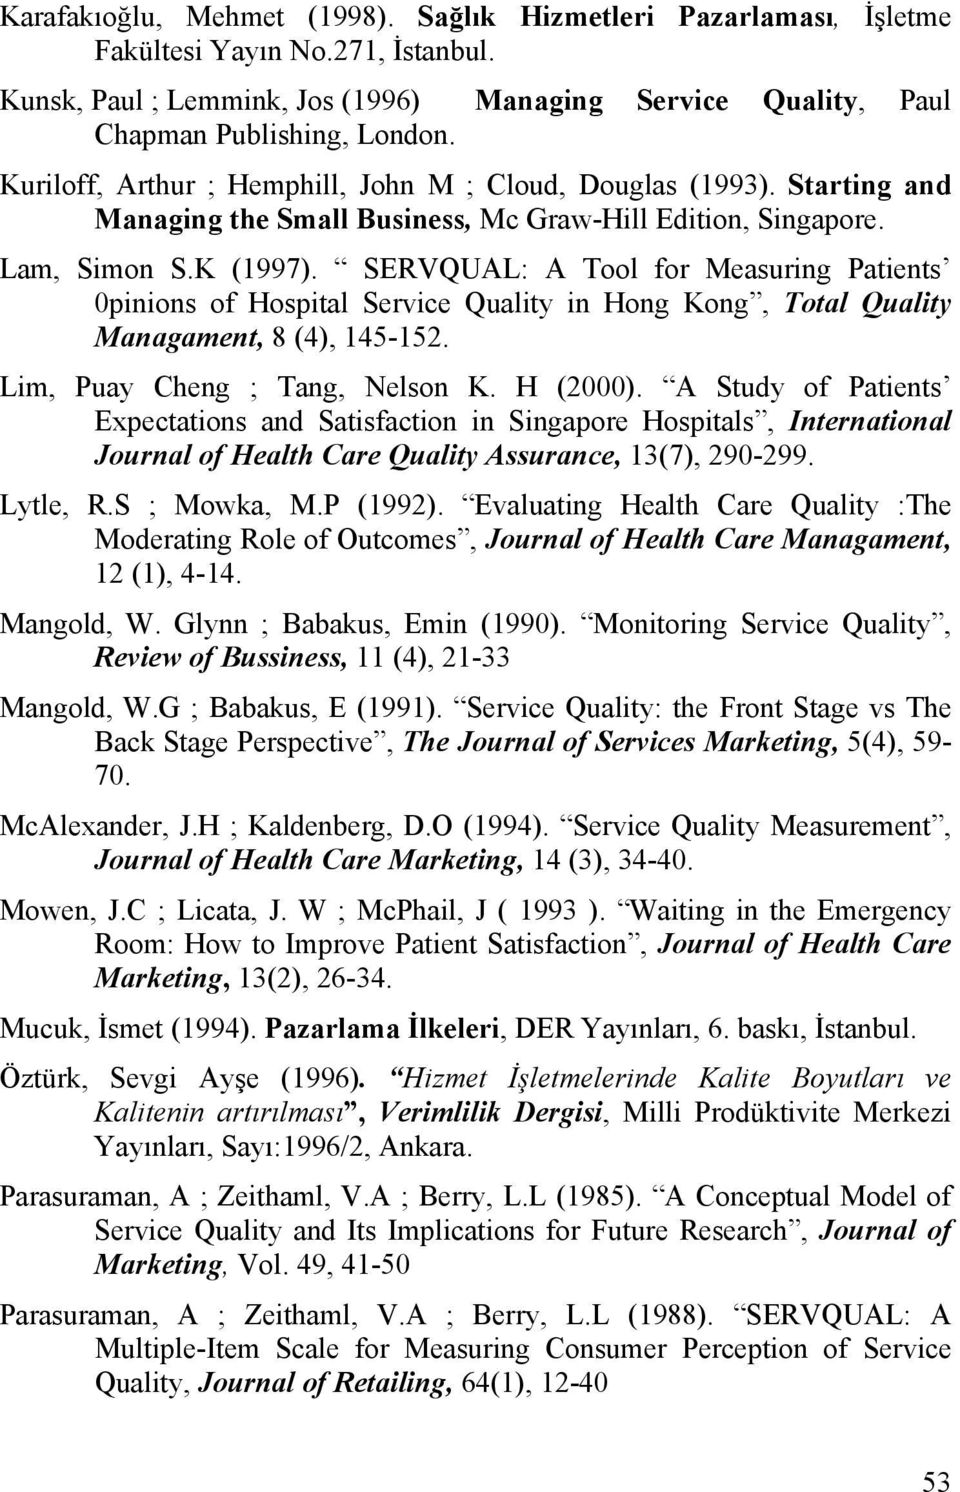 SERVQUAL: A Tool for Measuring Patients 0pinions of Hospital Service Quality in Hong Kong, Total Quality Managament, 8 (4), 145-152. Lim, Puay Cheng ; Tang, Nelson K. H (2000).